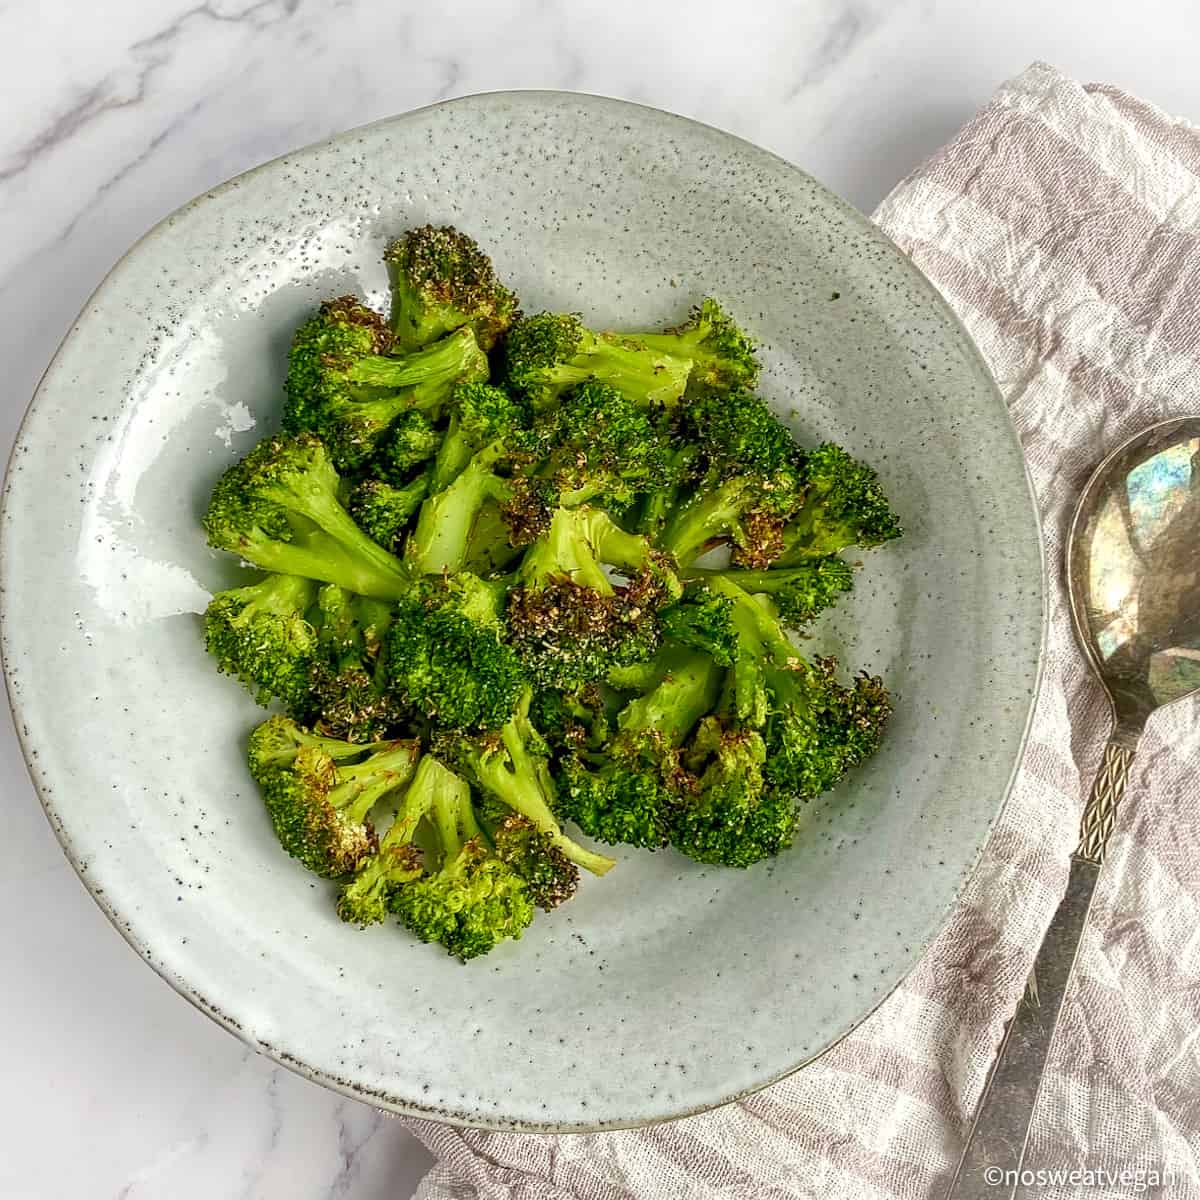 Frozen broccoli cooked in the air fryer.